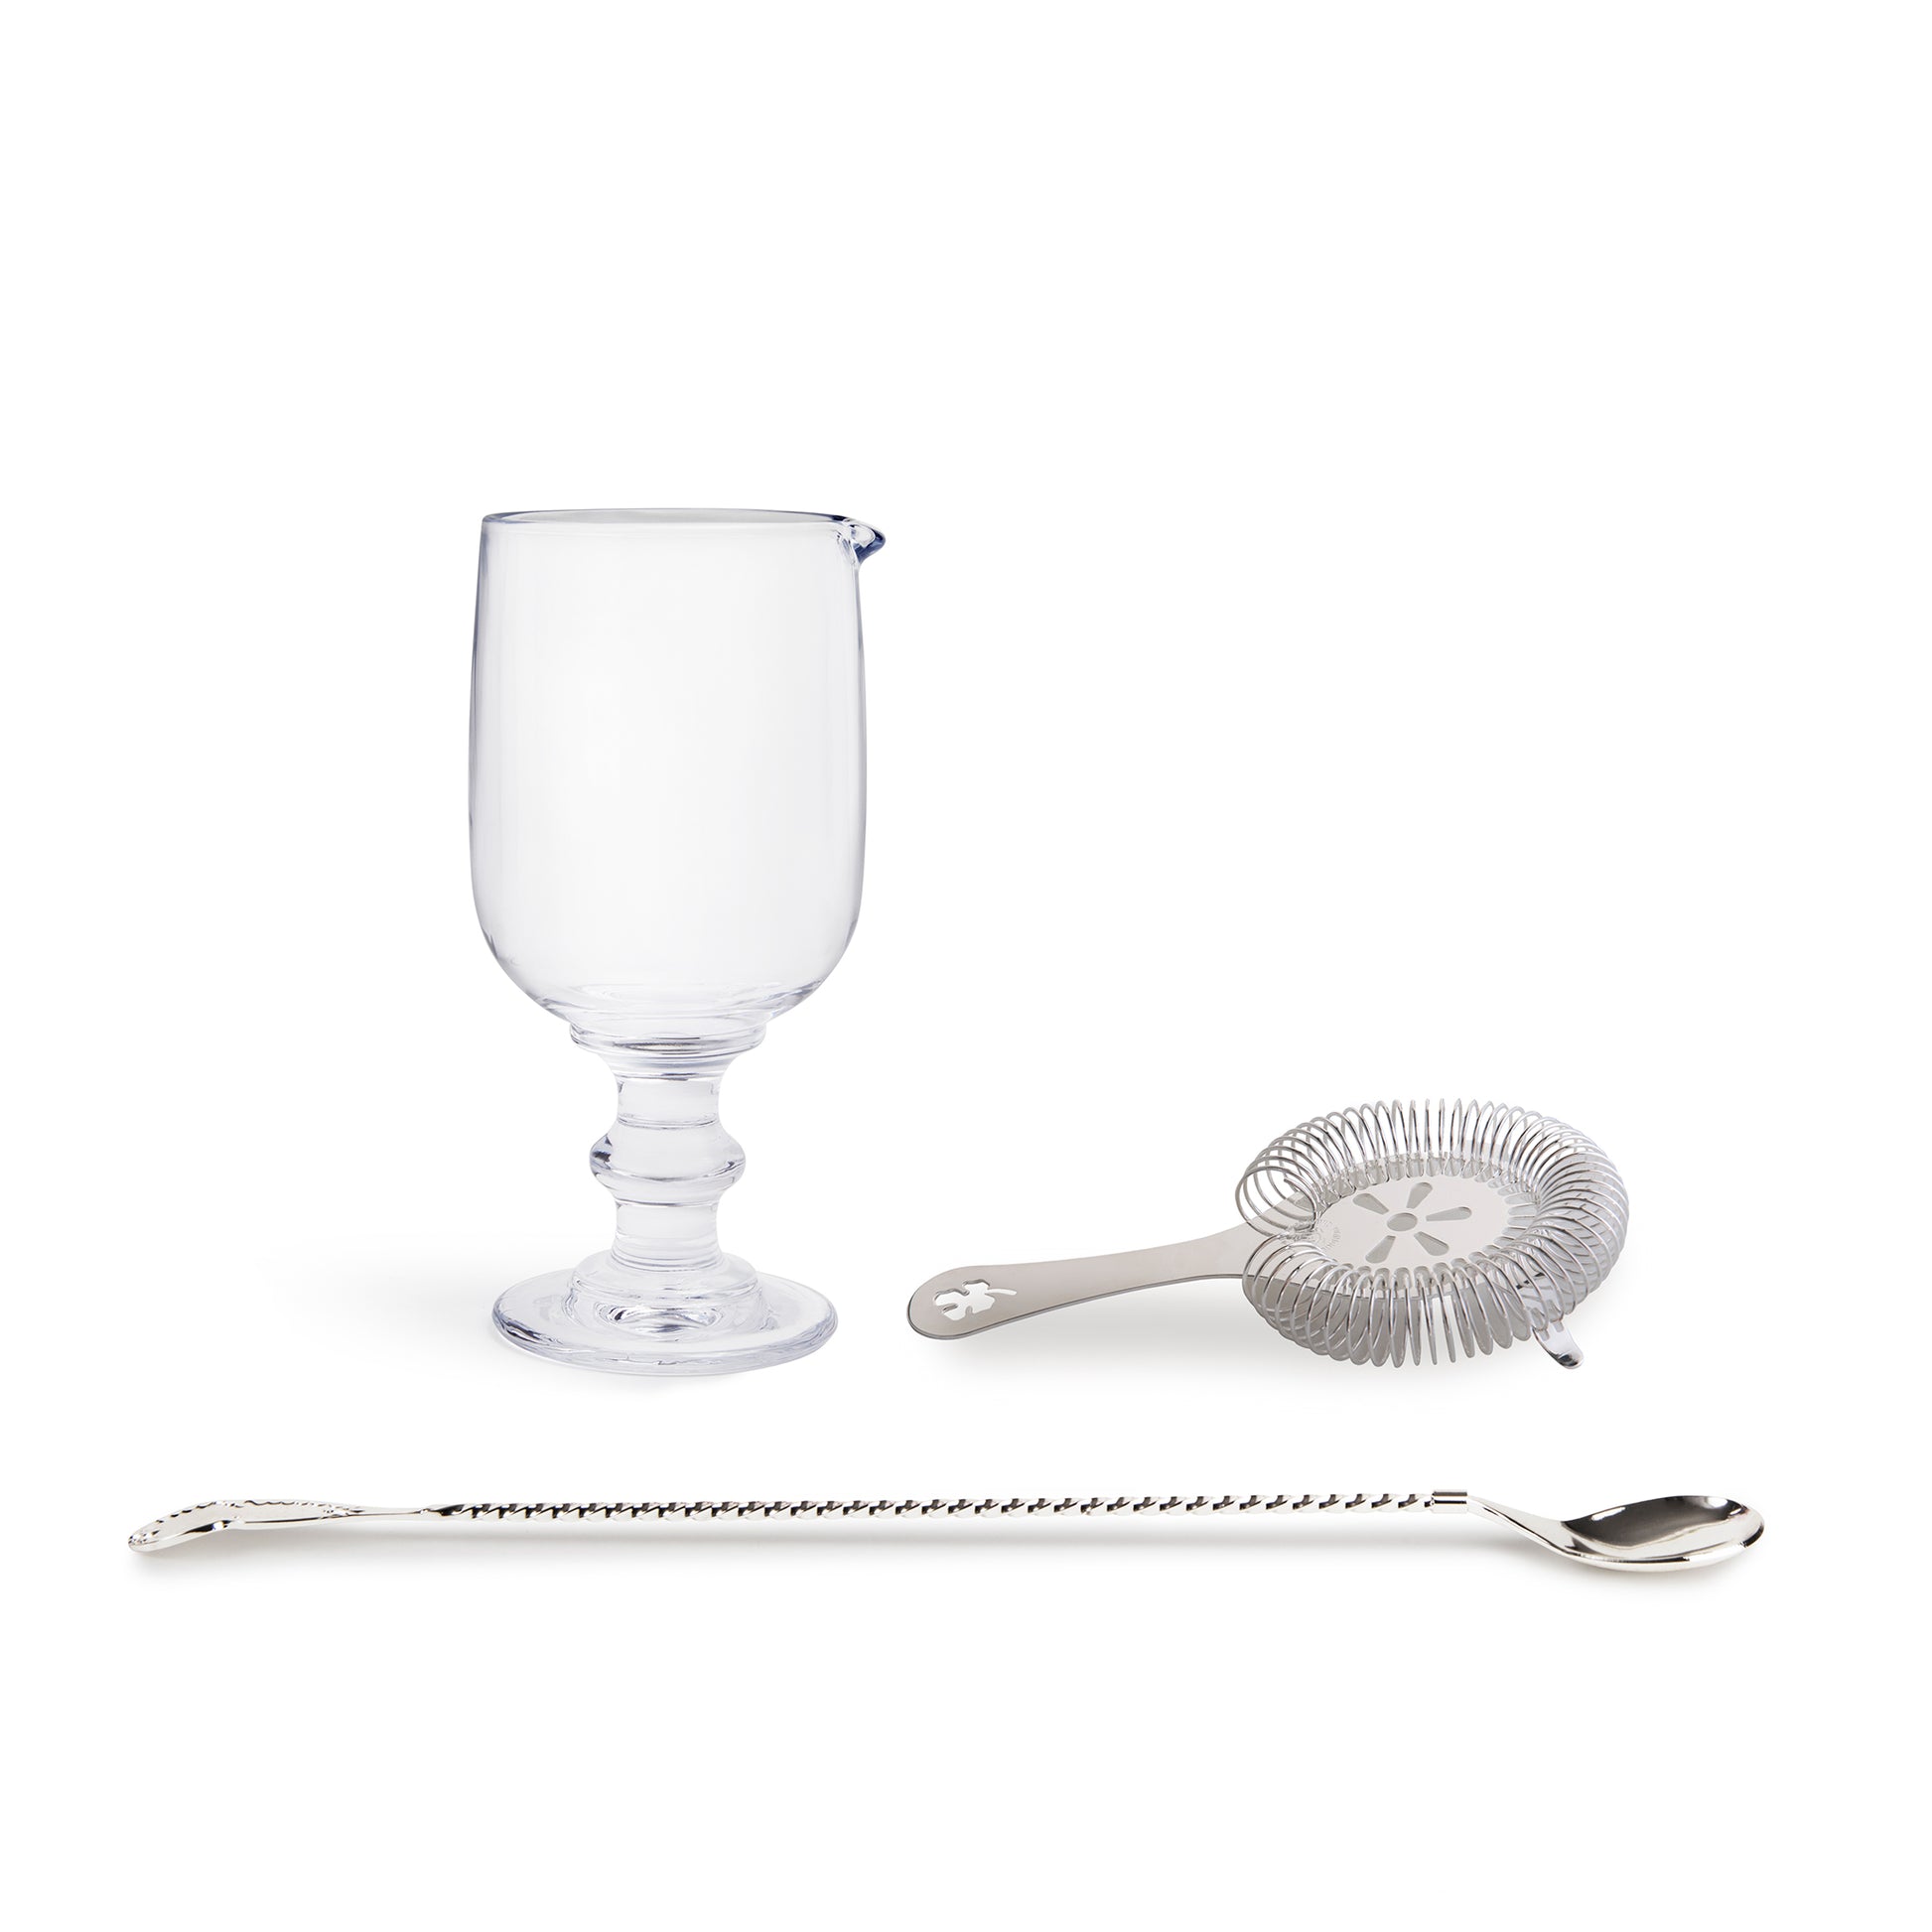 DAVID WONDRICH STIRRED SELECTION – CLEAR GLASS / SILVER-PLATED EPNS